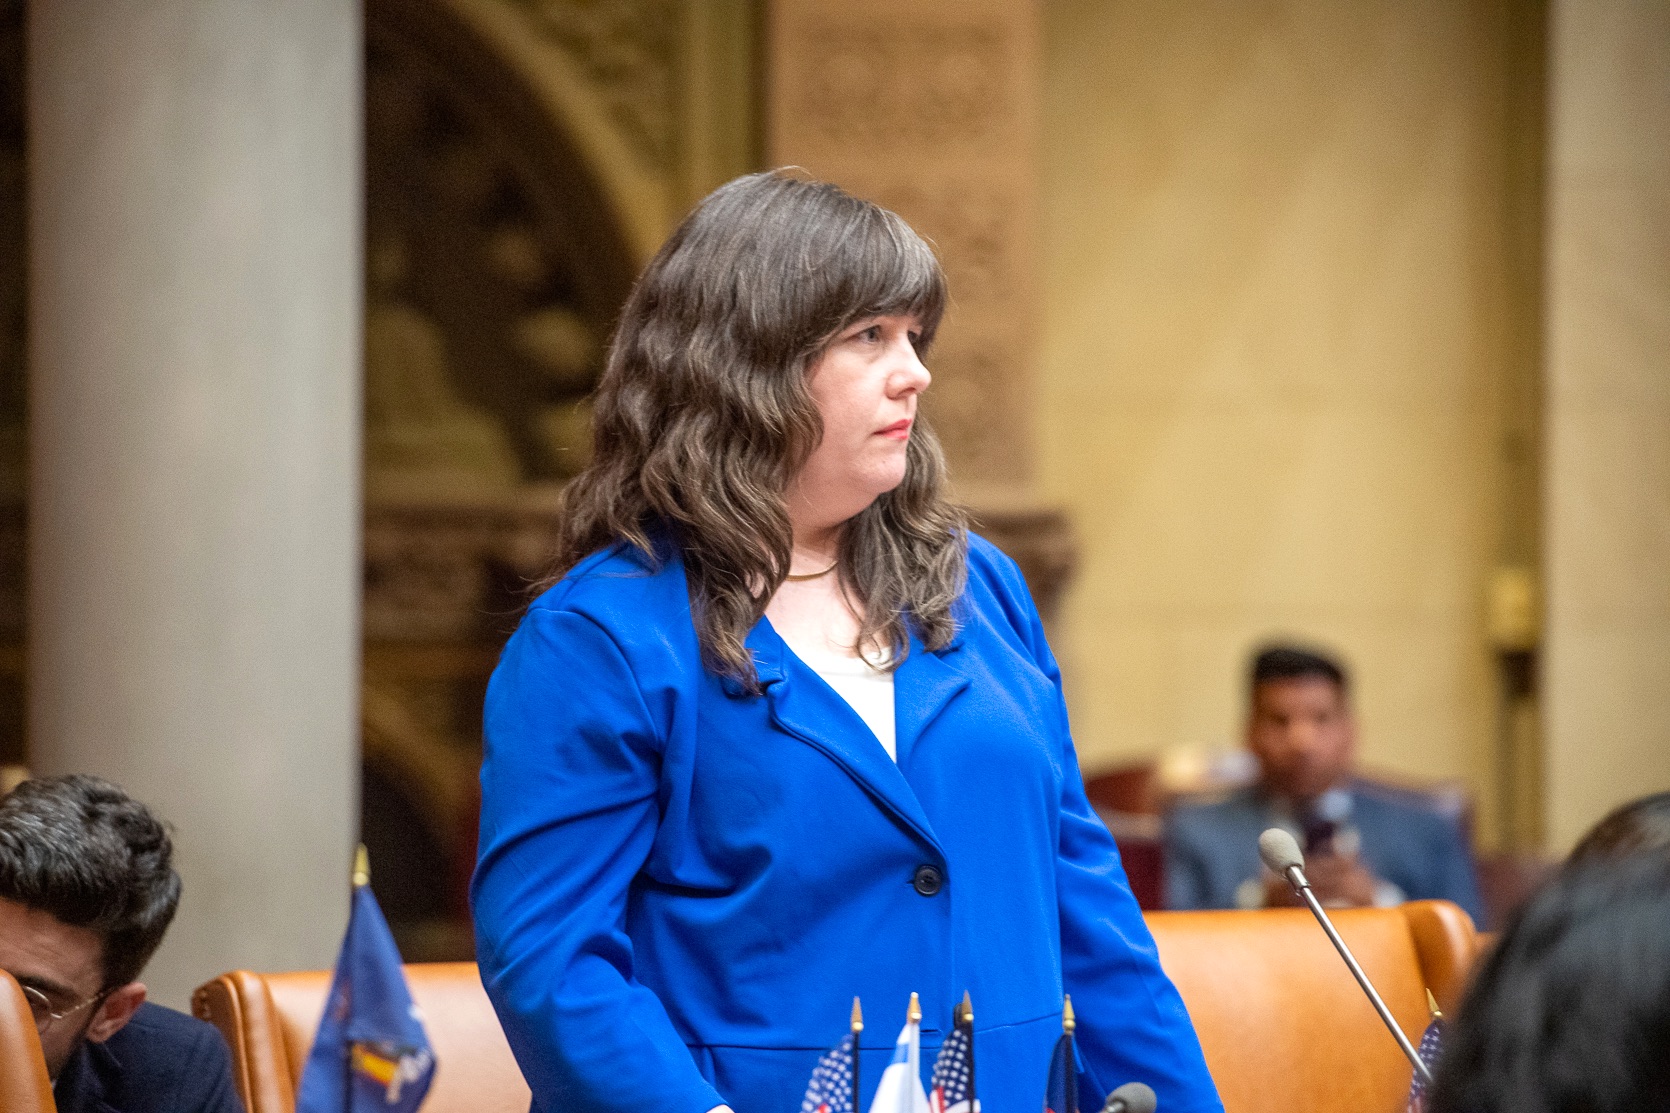 Assemblymember Gallagher stands in a neutral-toned room, wearing a blue blazer over a white shirt.